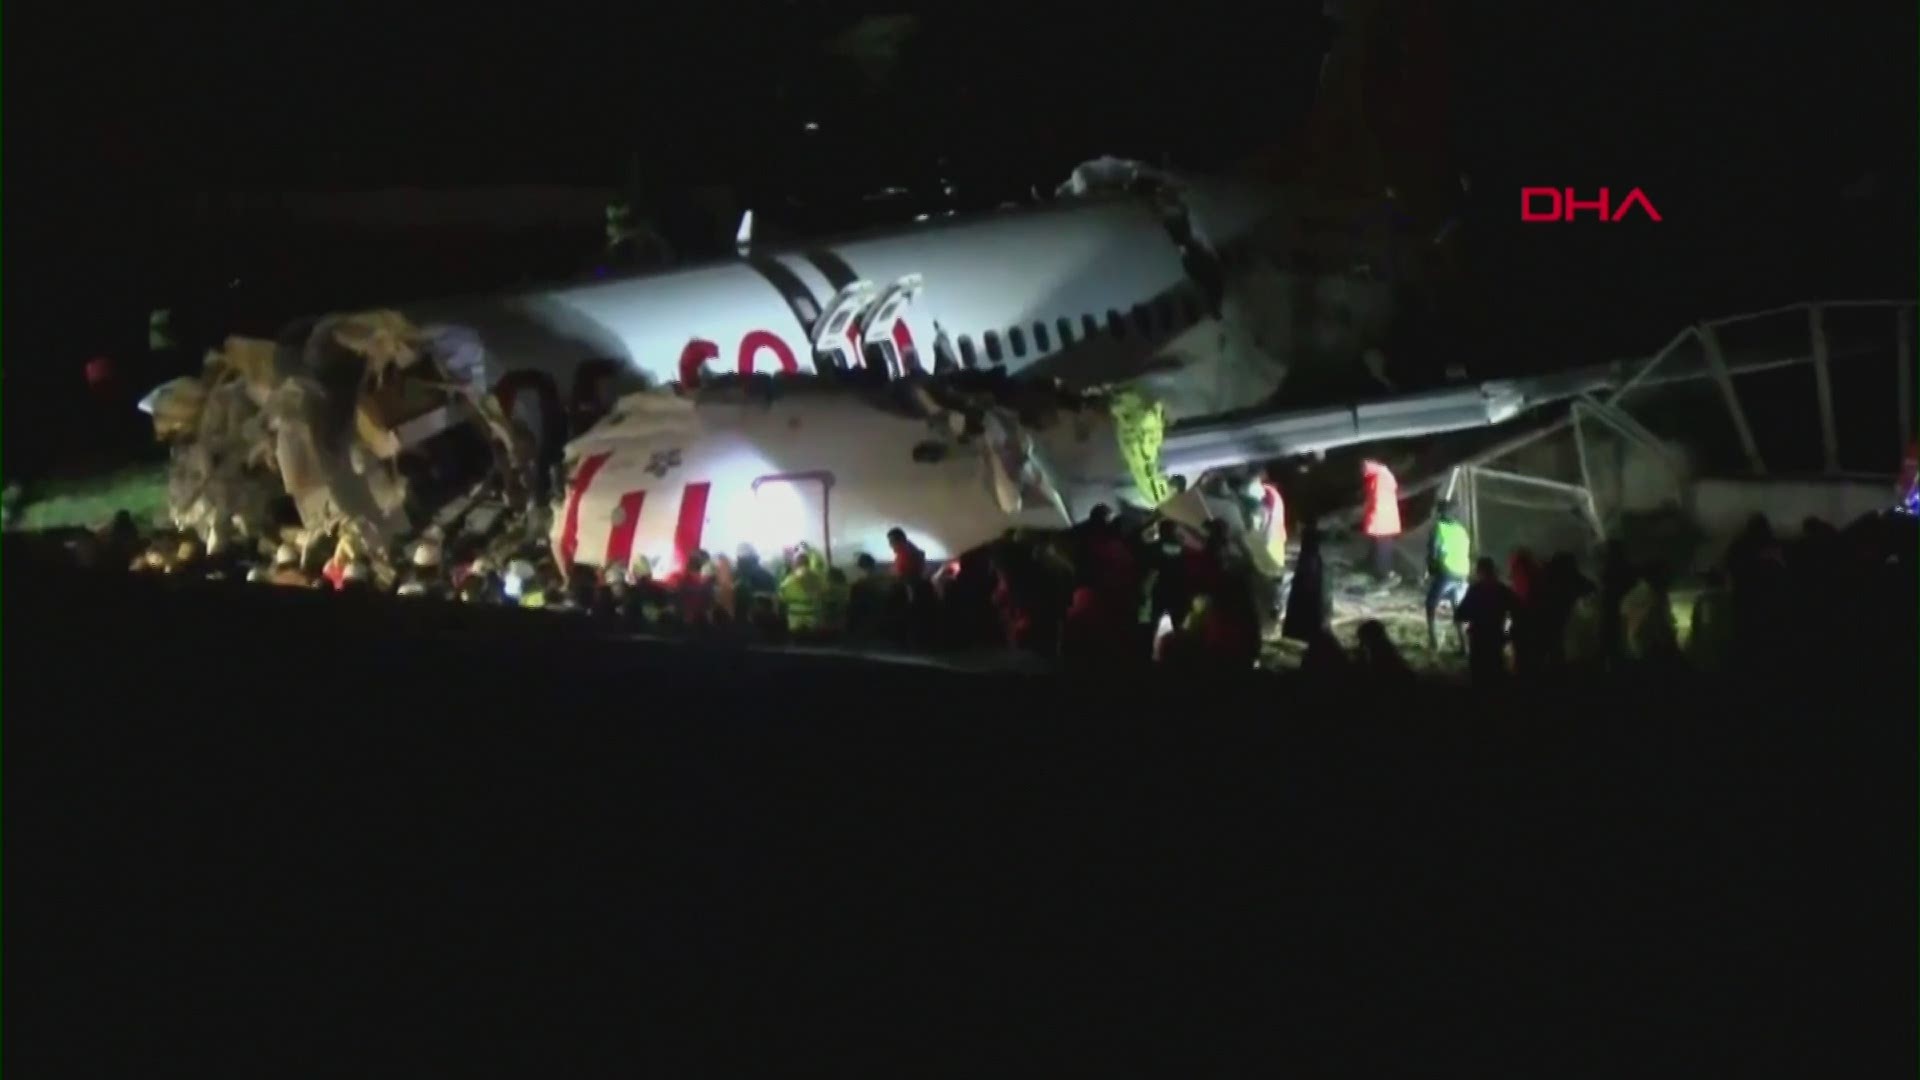 Video of the crash site posted by NTV television showed the plane's fuselage smashed into three pieces. (AP Video)